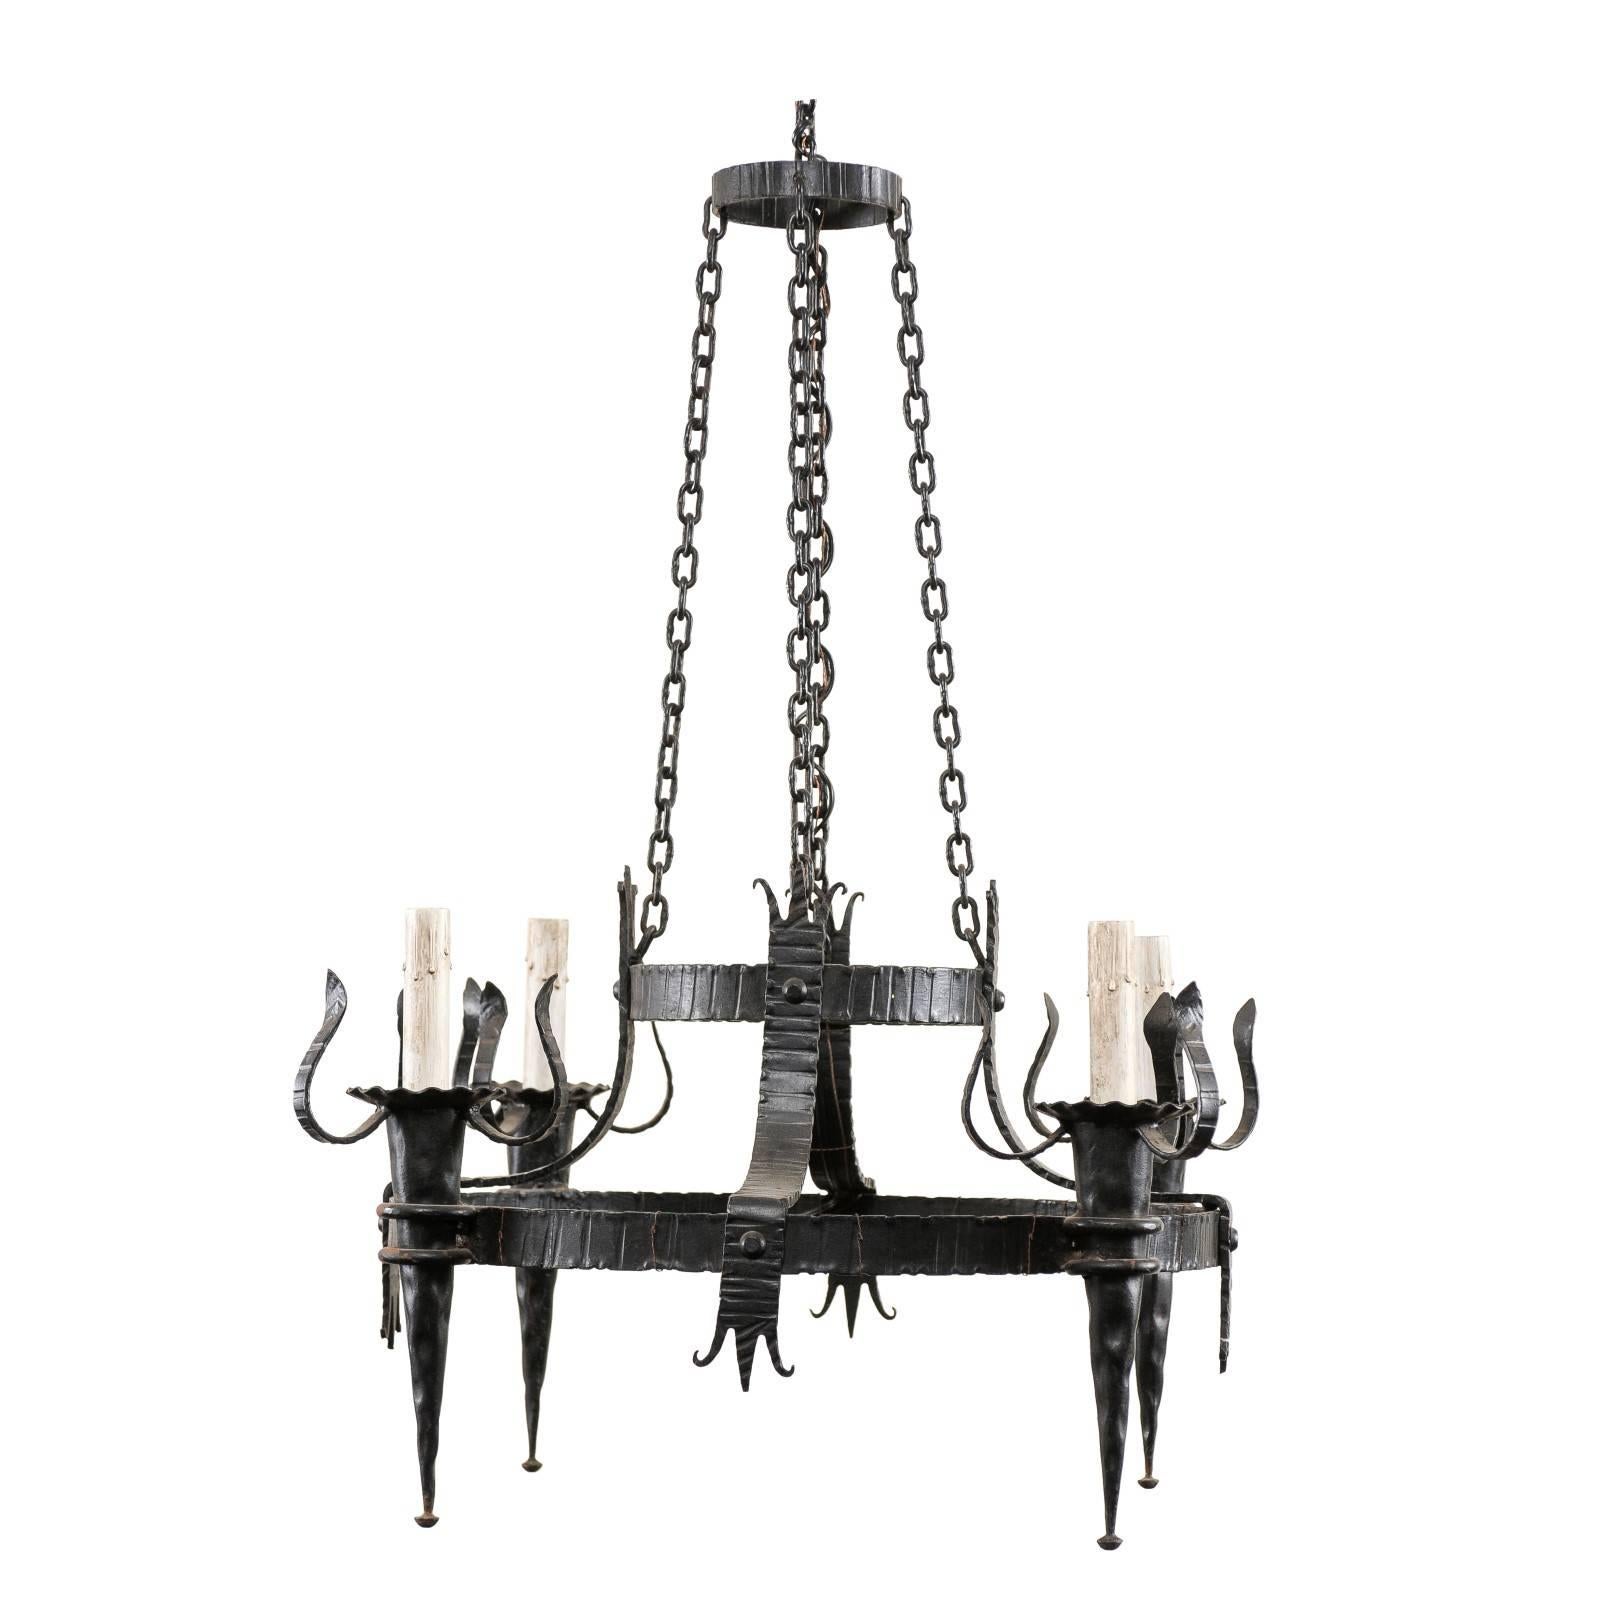 French Vintage Four-Light Black Iron Chandelier with Torch Shaped Arms